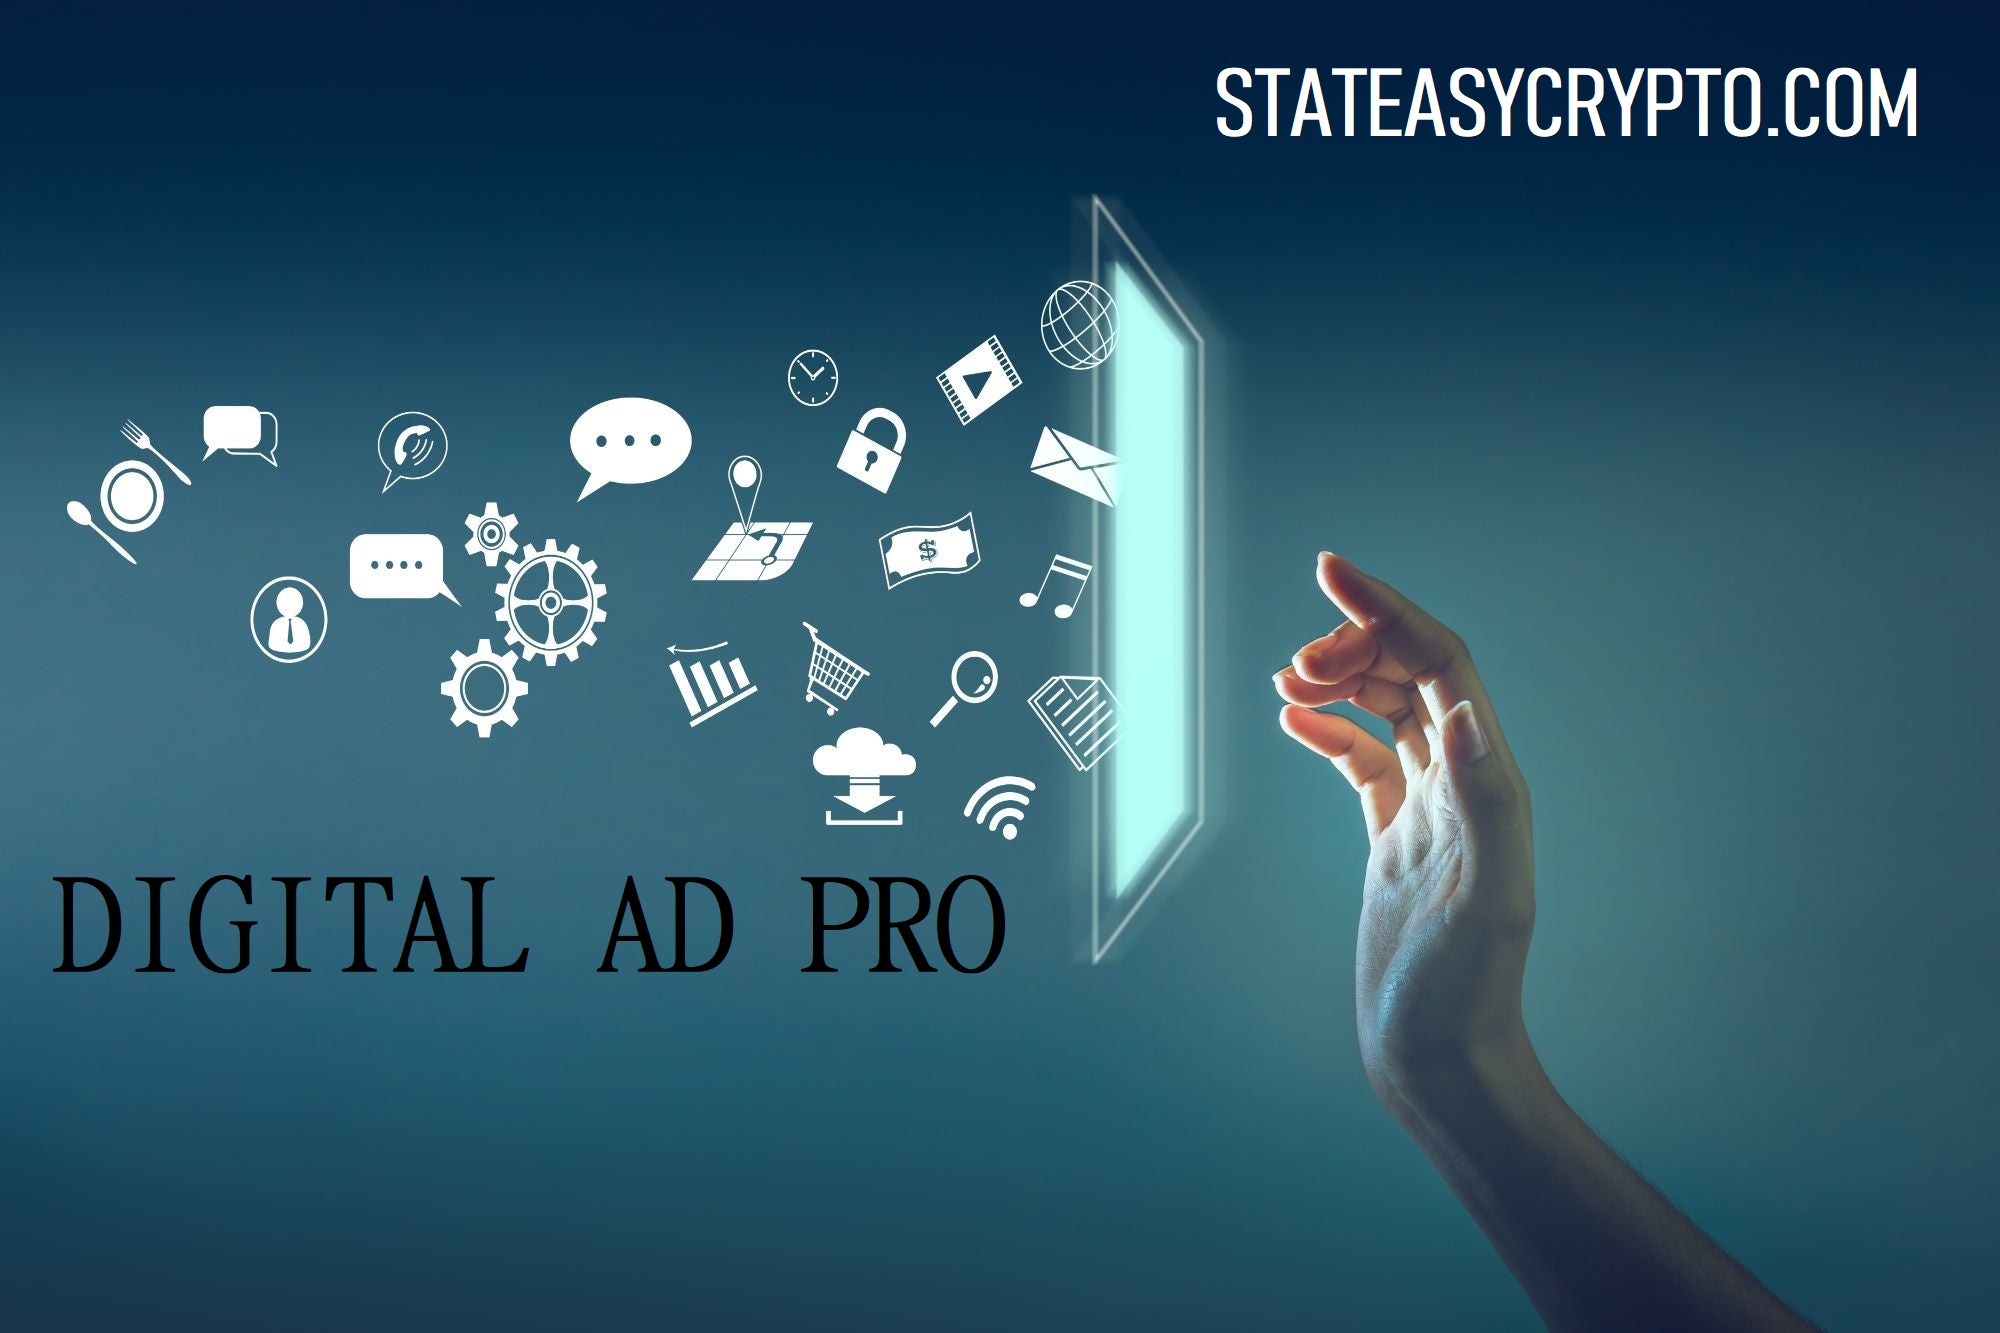 Digital Ad Pro Review